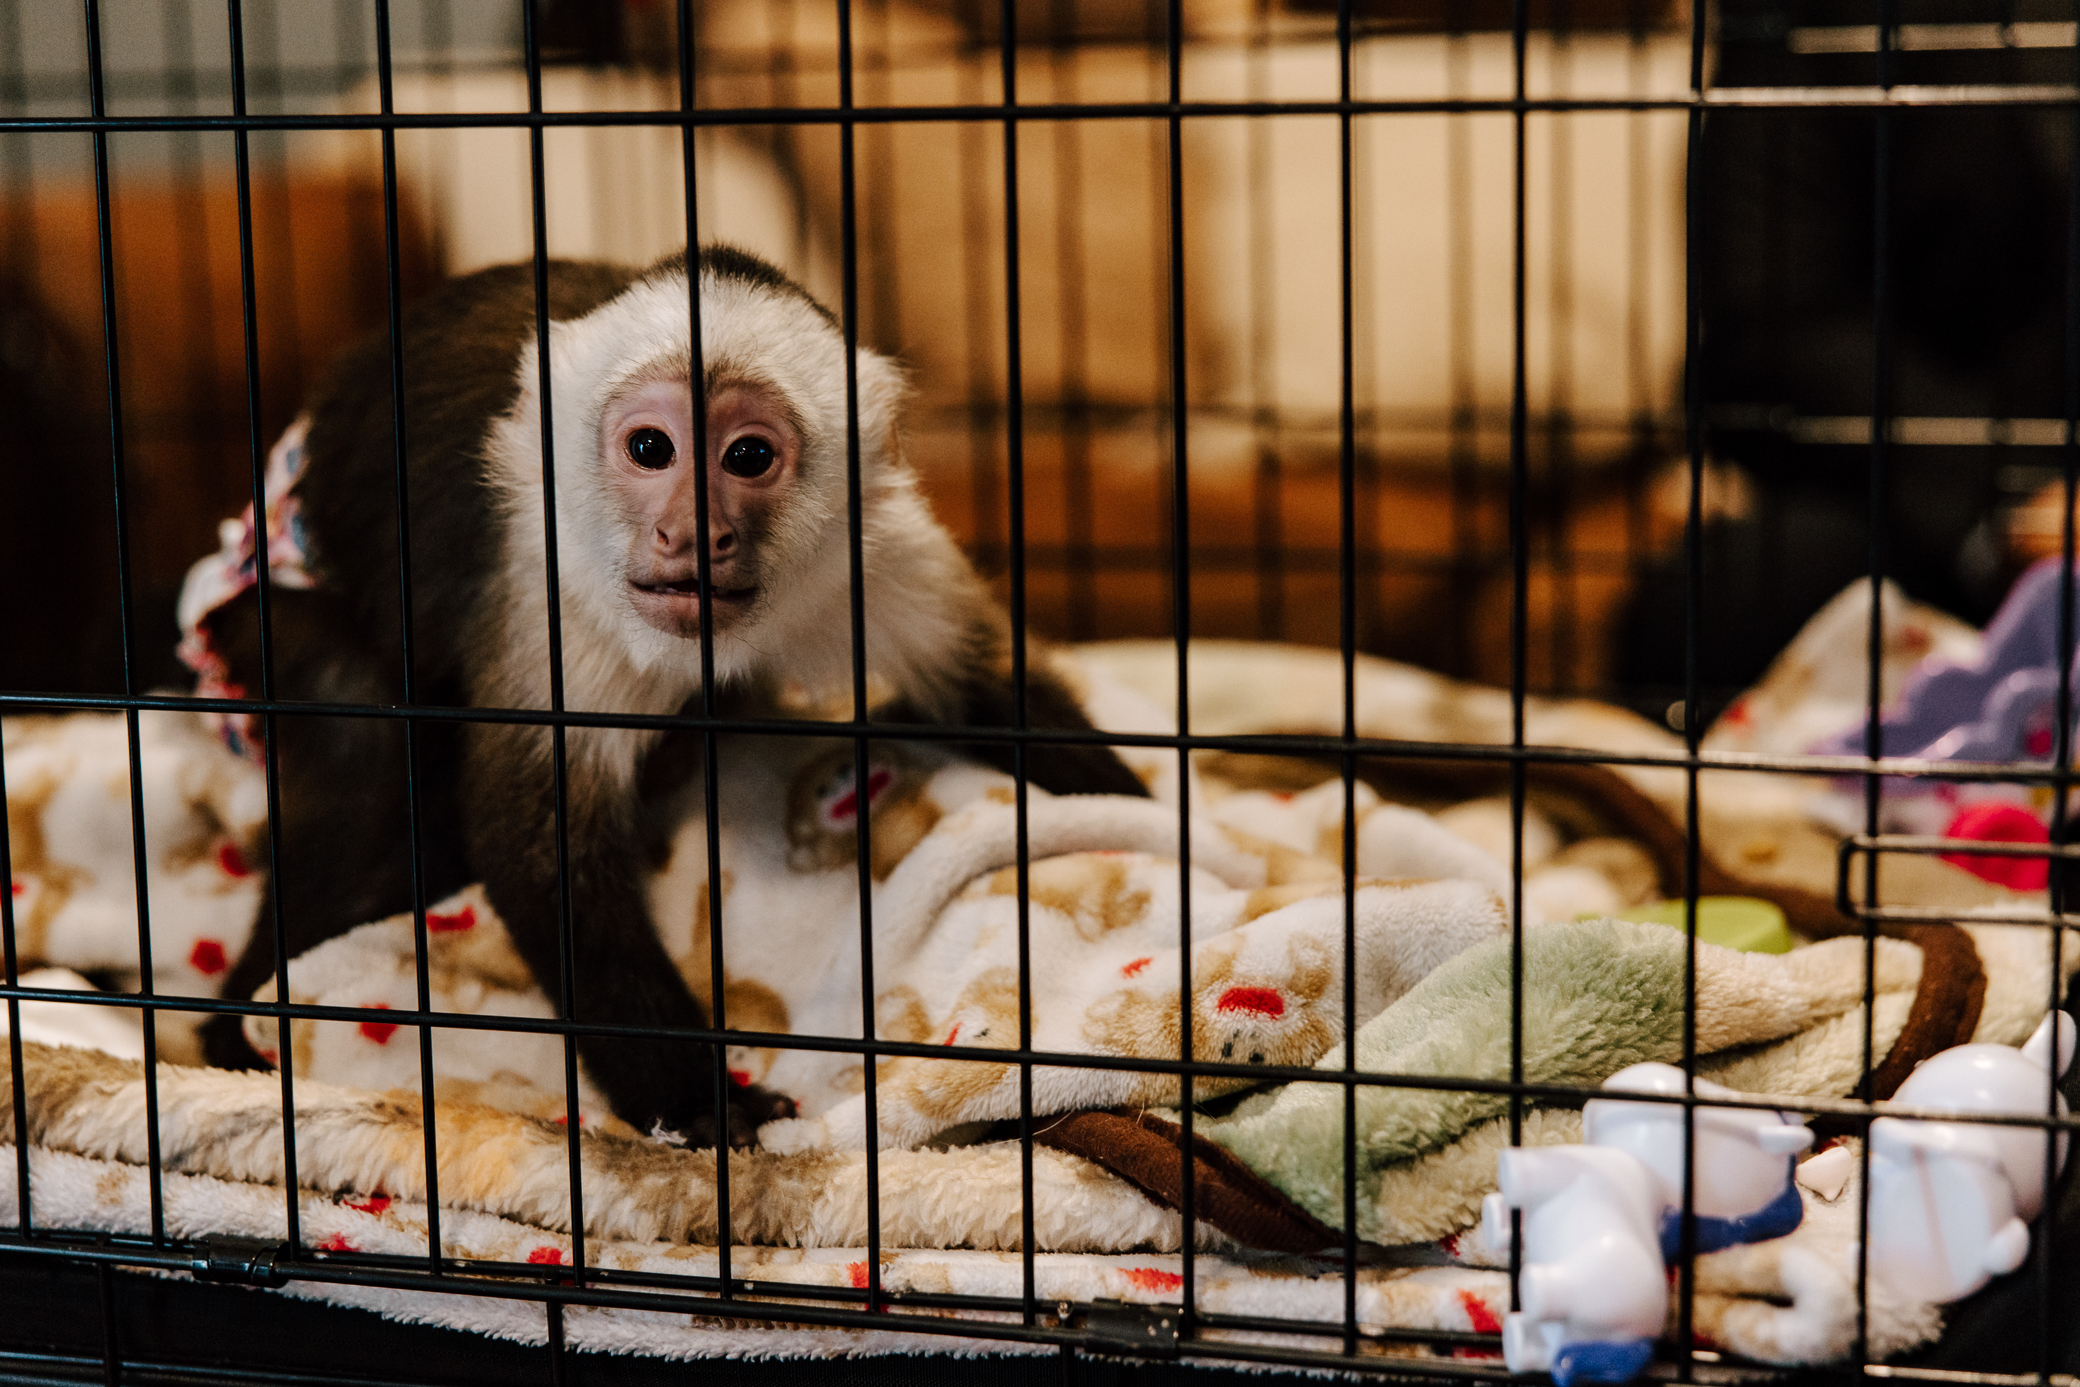 A capuchin monkey peers out from its crate filled with blankets and toys.